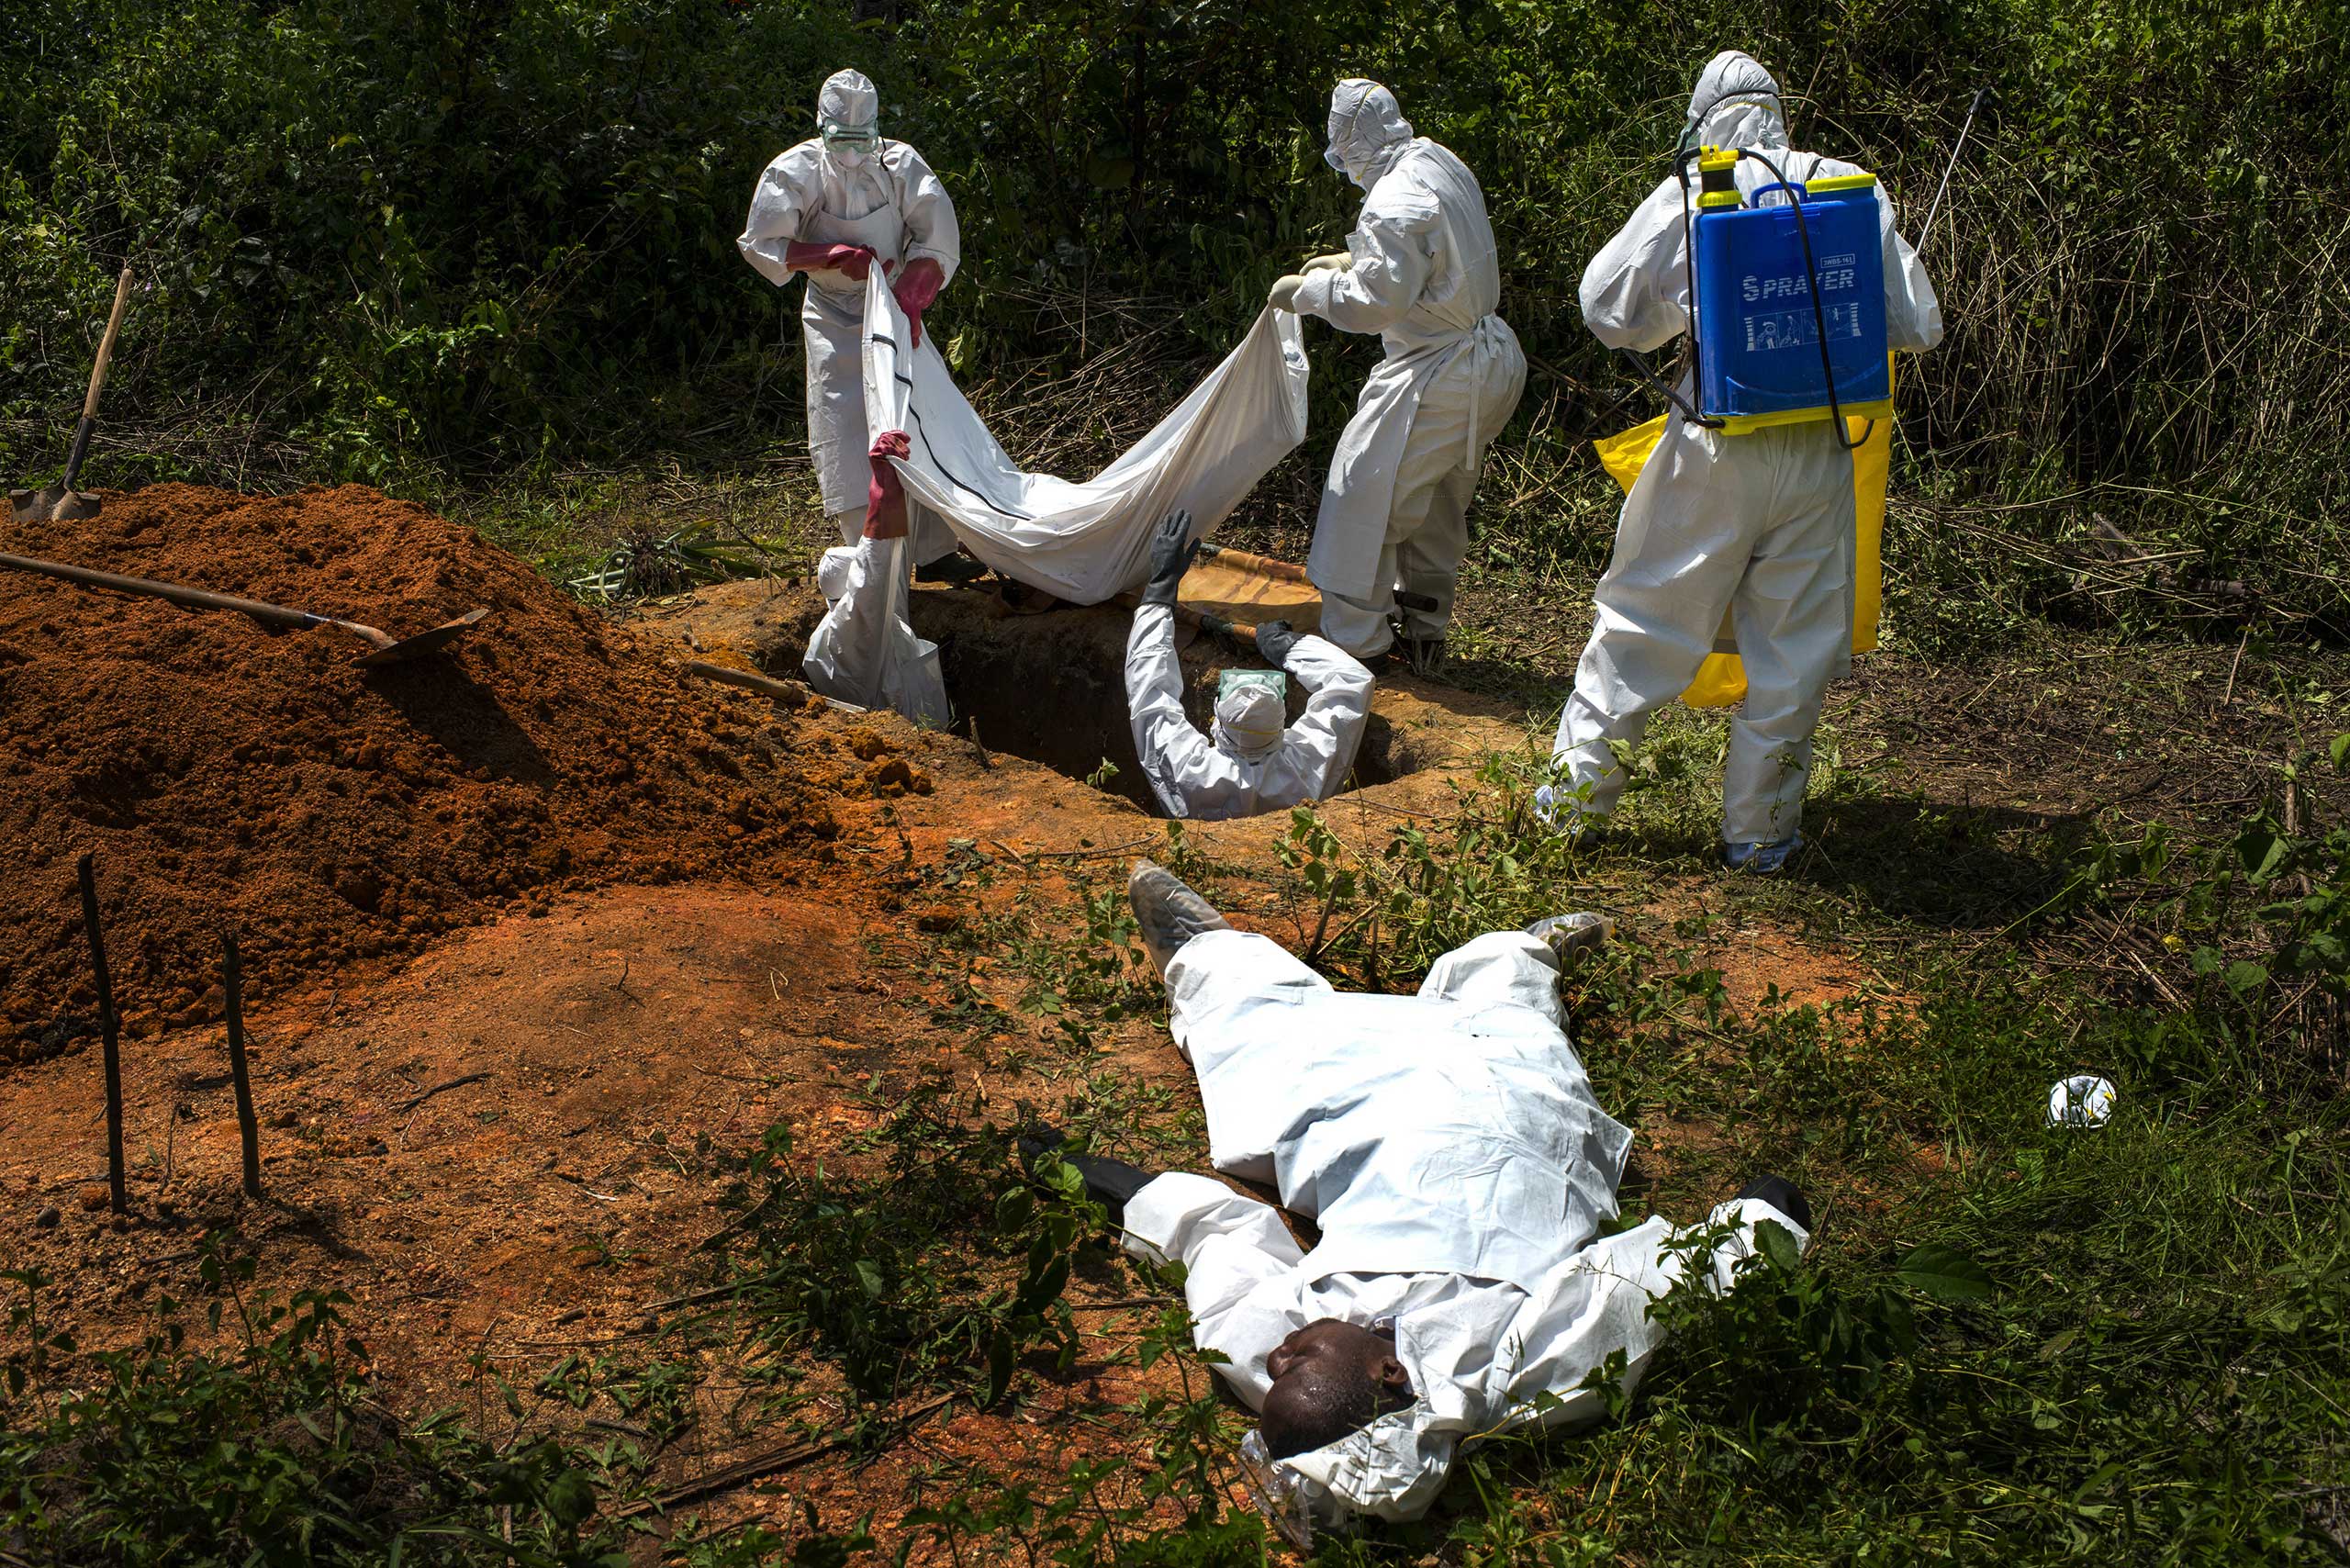 Alexander Morris lays flat on his back after fainted due to the extreme heat inside a  protective suit while the Lofa County health department team buried his sister, on Nov. 7, 2014 in Voinjama, Liberia. Days later the health department said an Ebola test on the body was negative.